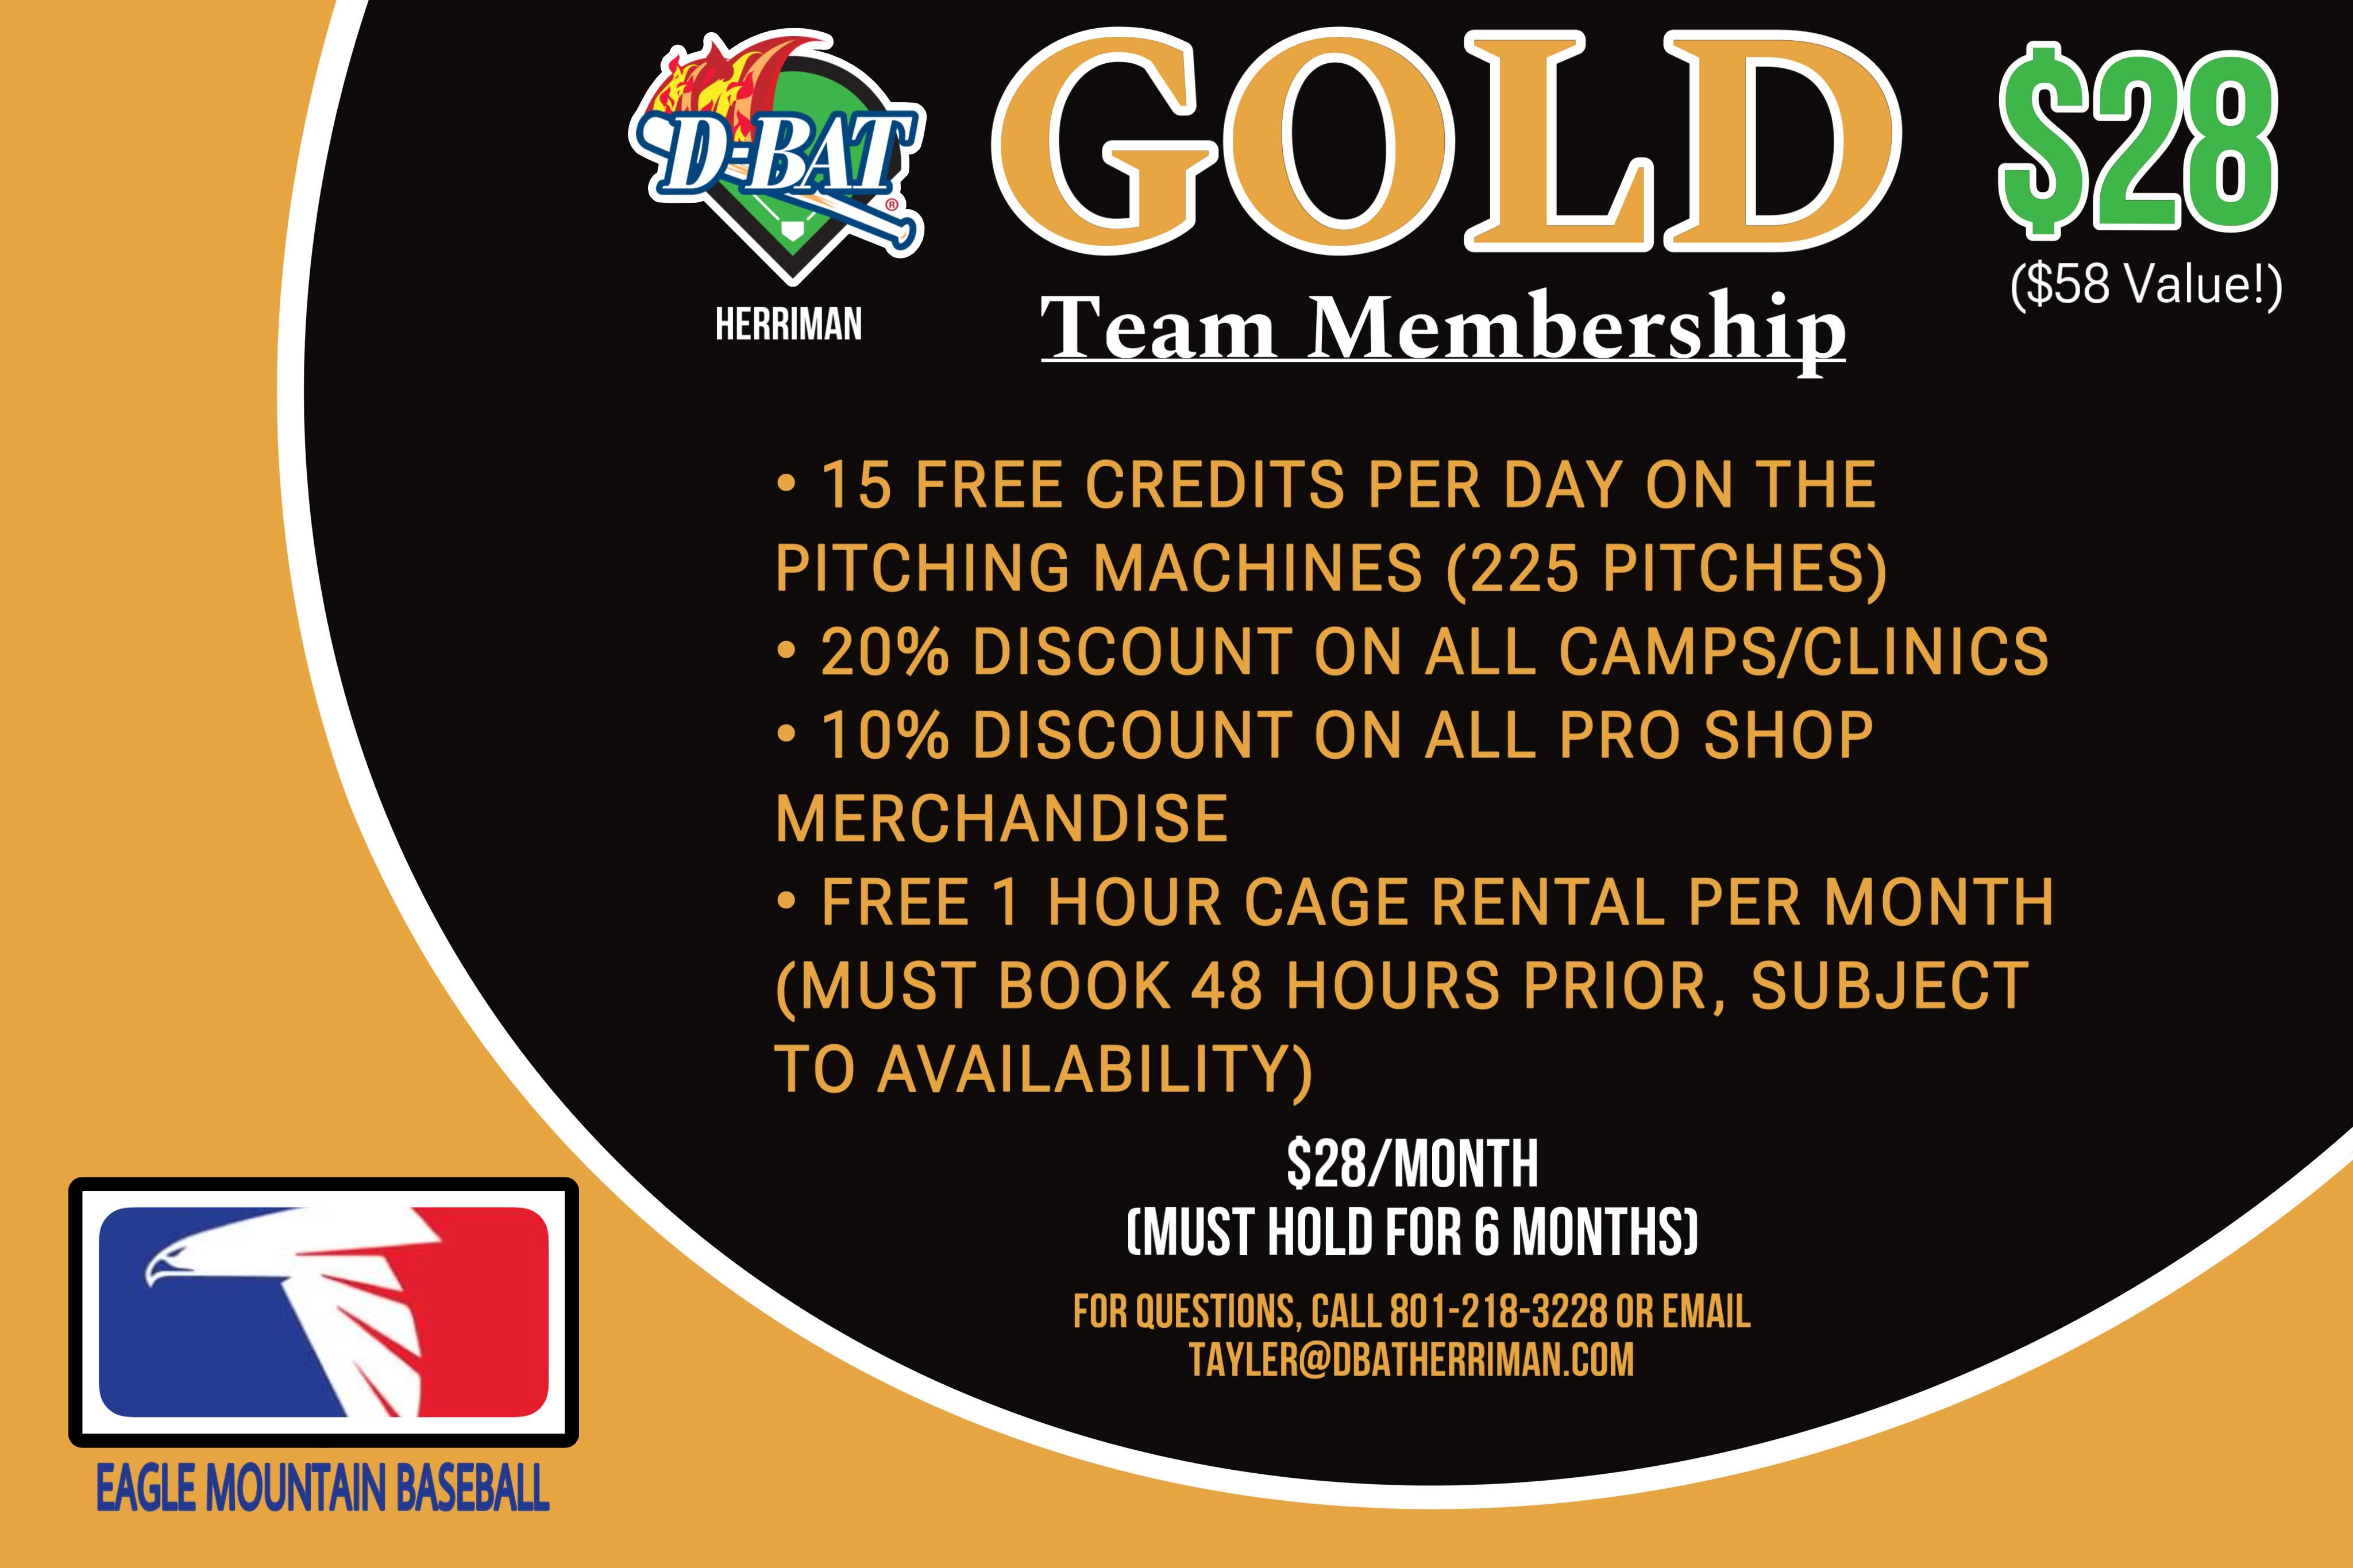 An awesome deal on a DBat membership!